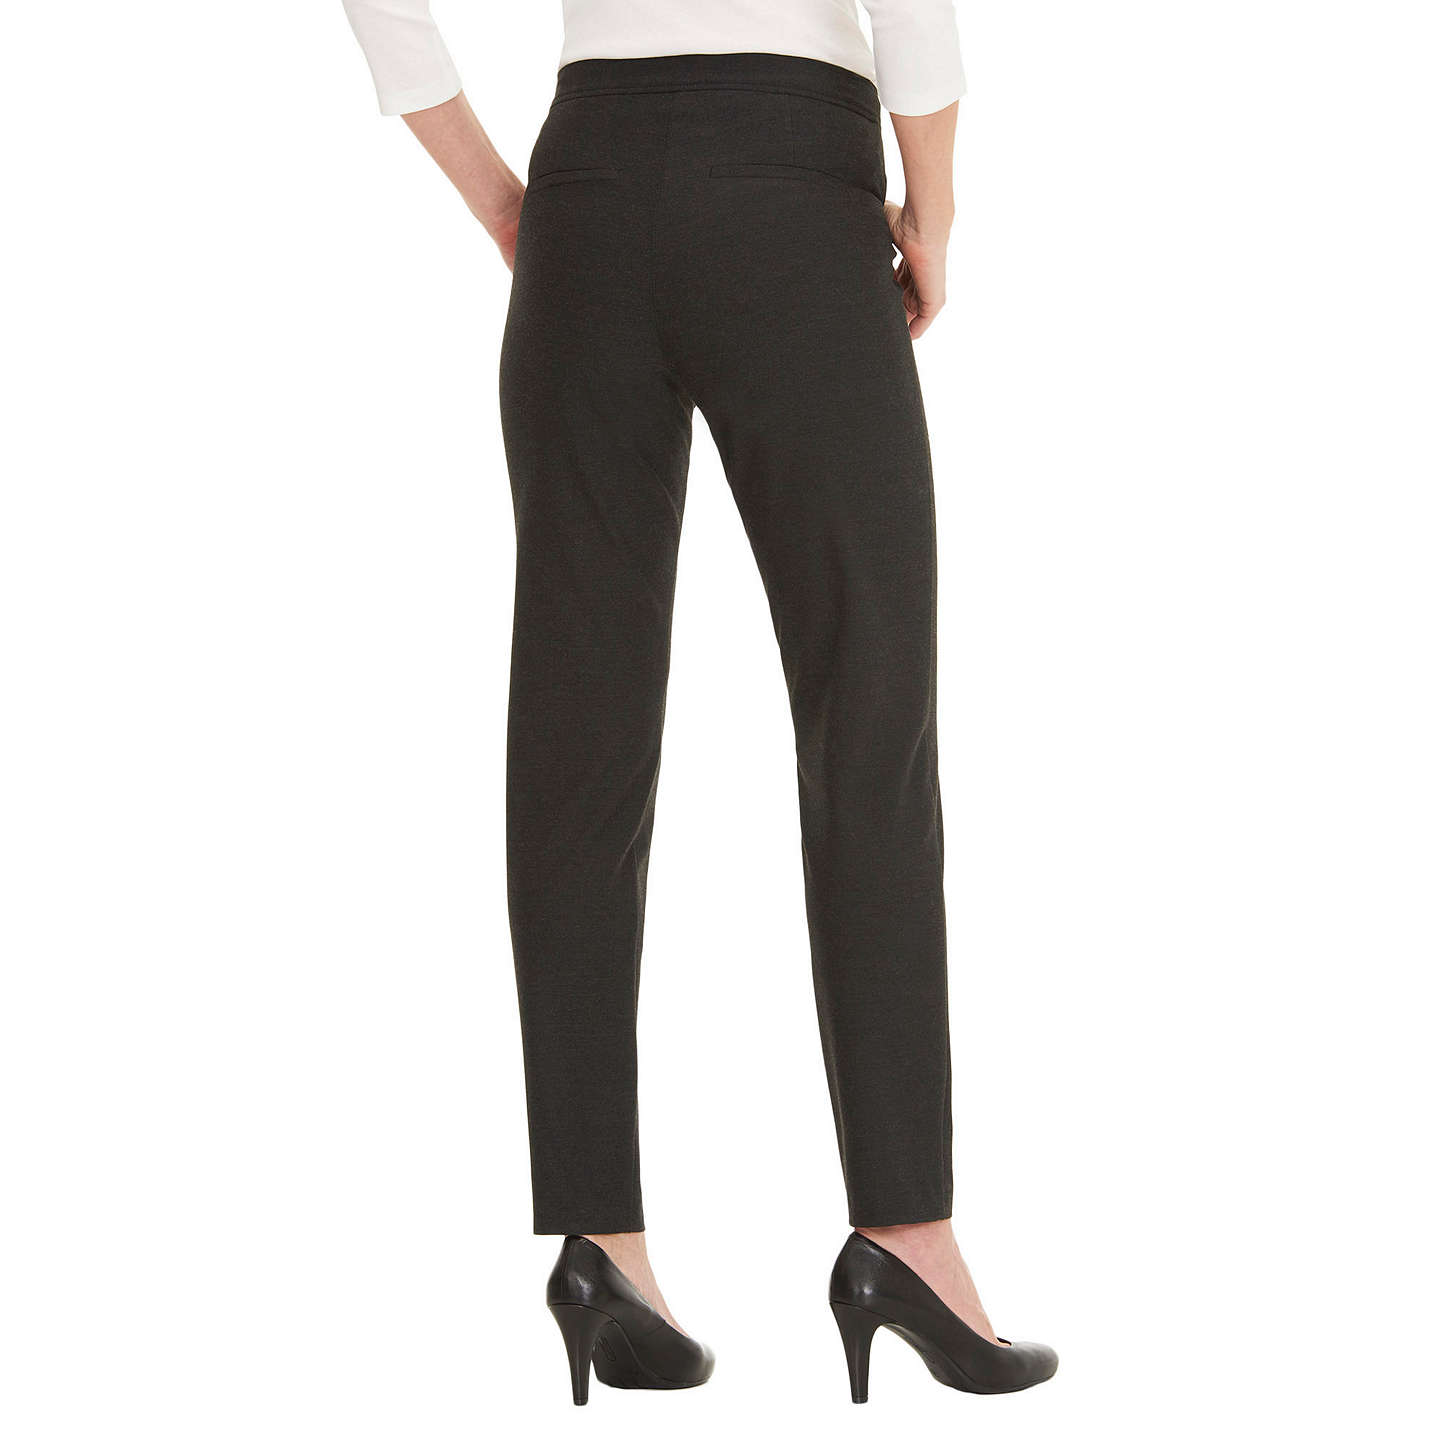 Betty Barclay Perfect Body Trousers at John Lewis